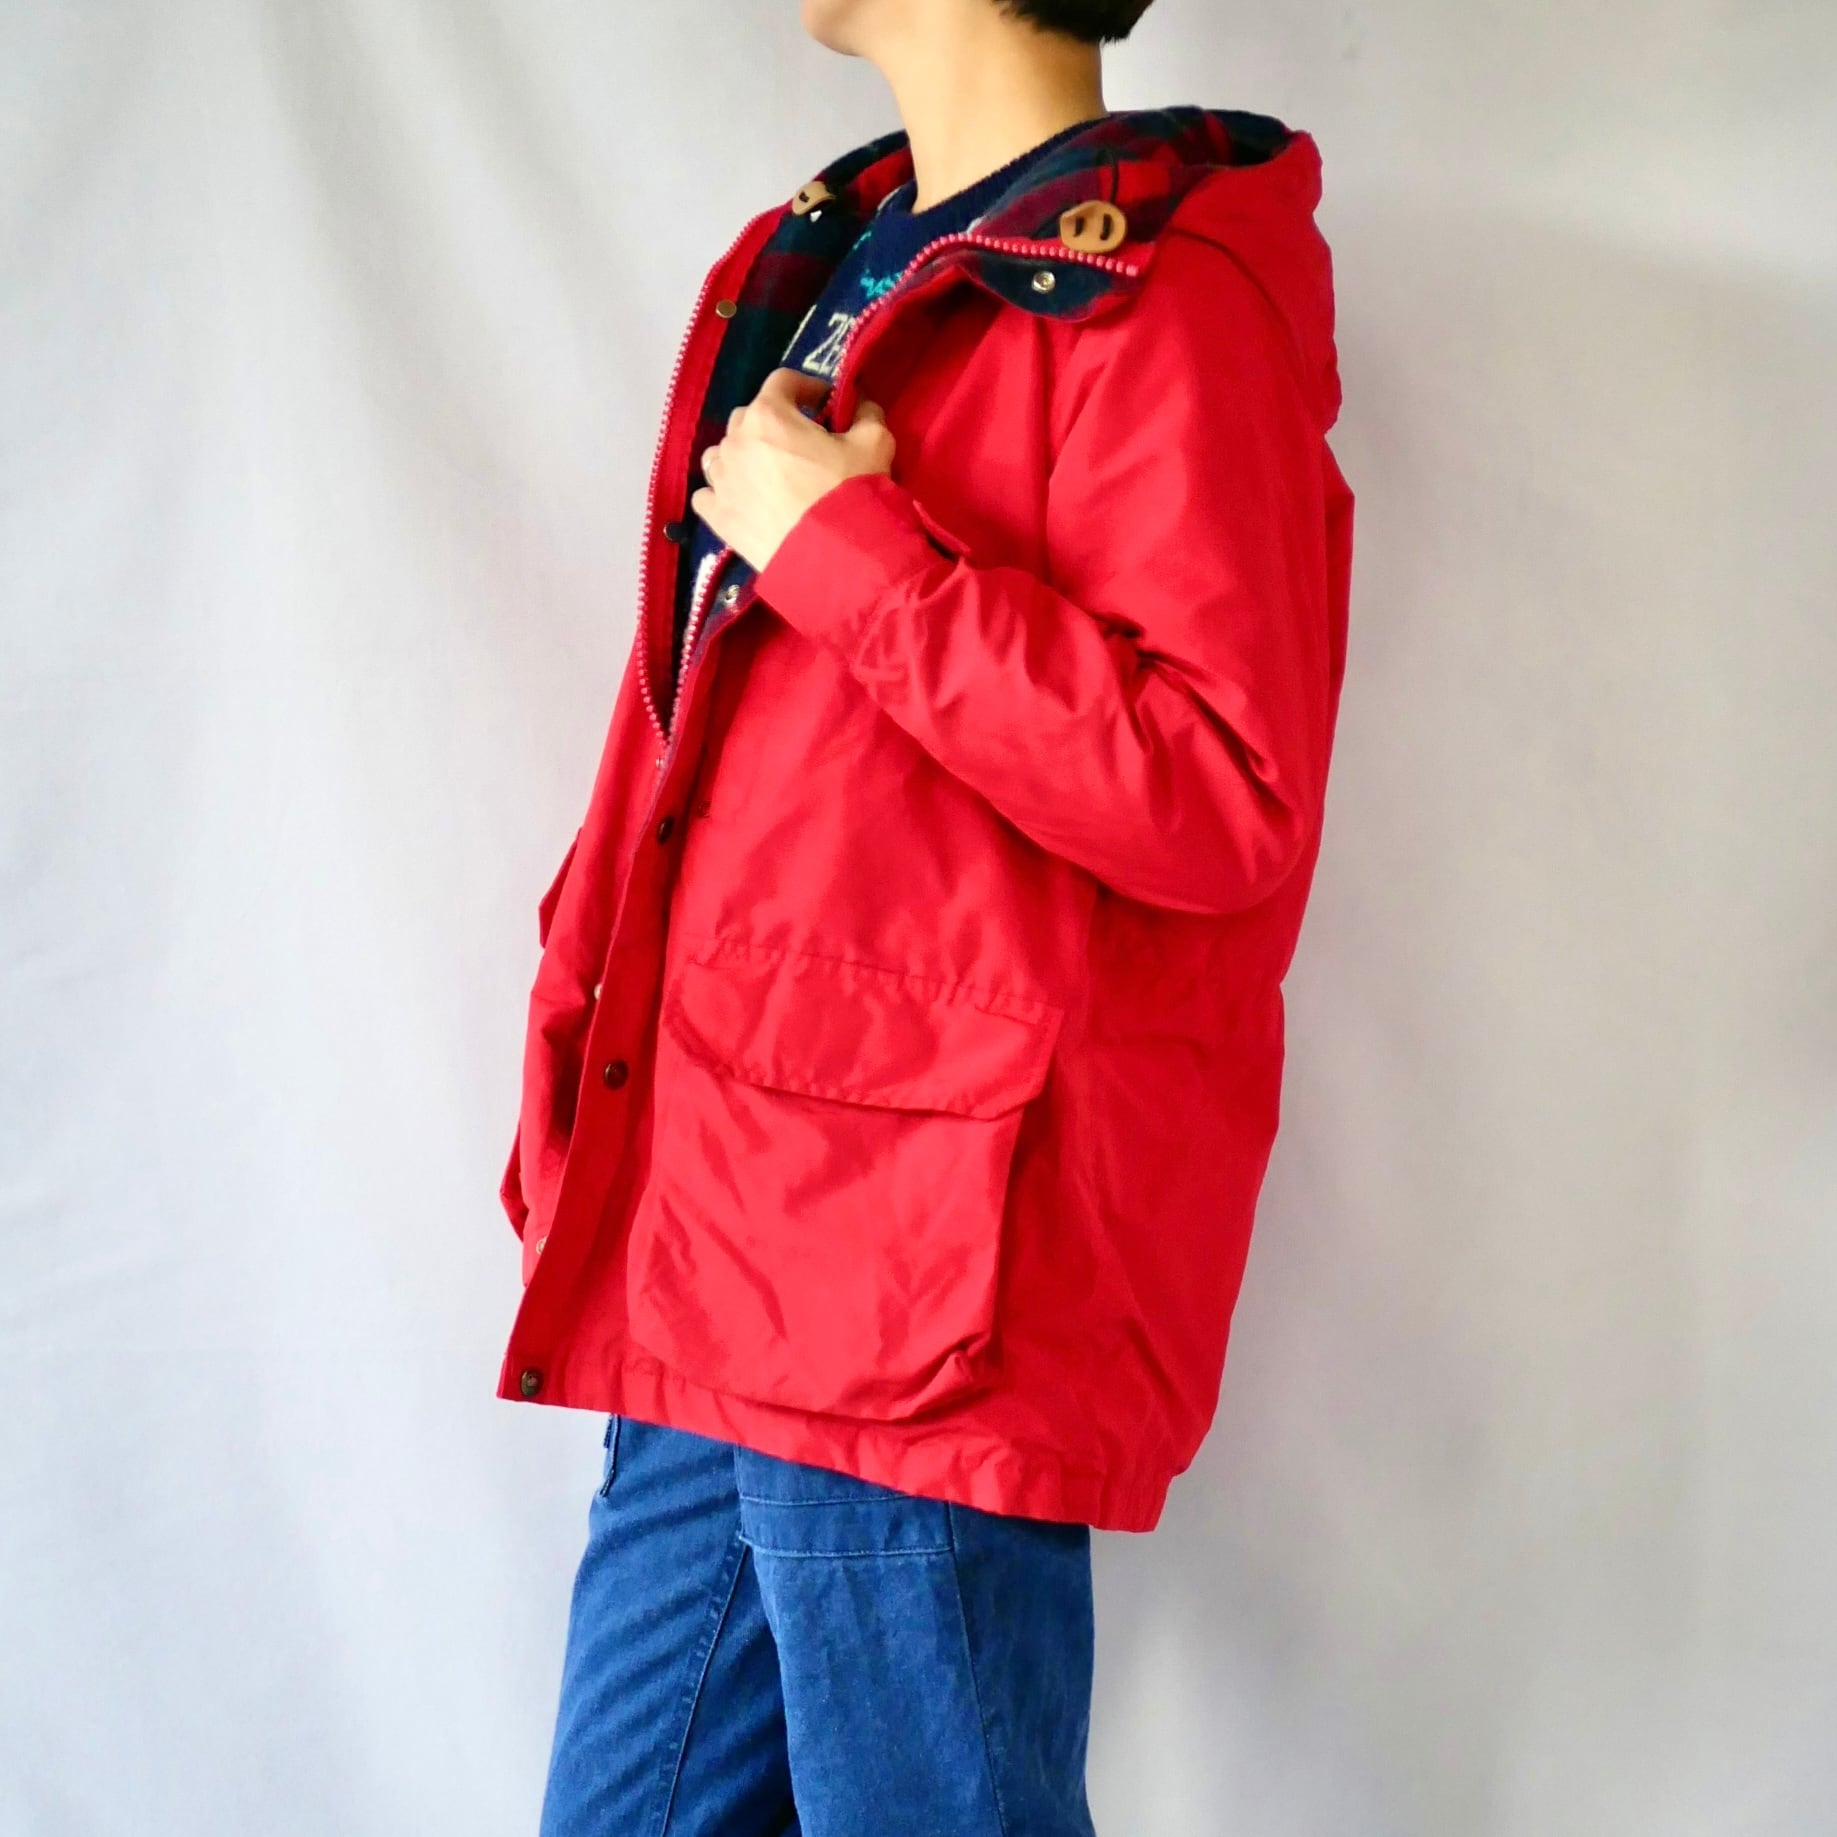 80s Made in USA woolrich red mountain parka アメリカ製ウールリッチ赤マウンテンパーカー